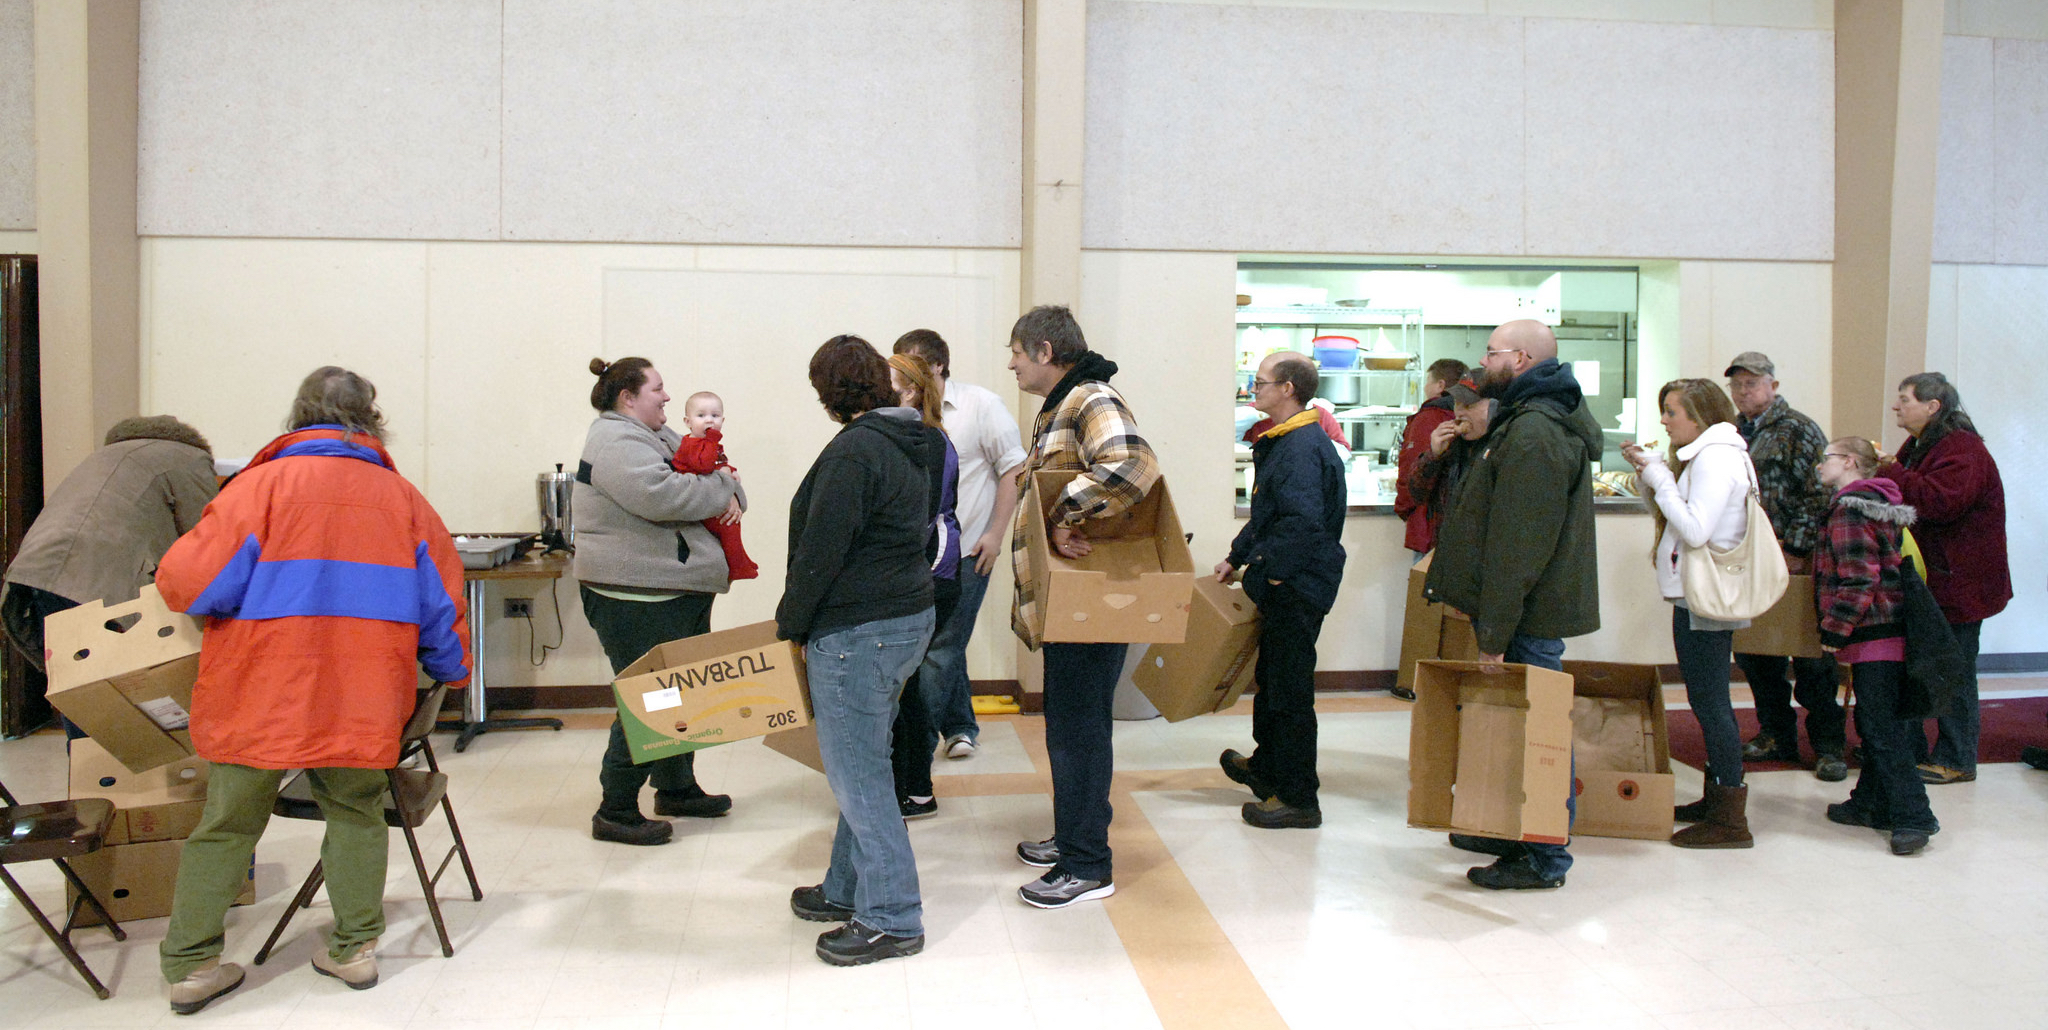 A line forms at a church food bank in Alanson, Mich. Such third-party aid to the poor has been counted as "welfare spending" by the state to qualify for federal block grants to relieve poverty. (Bridge photo by John Russell)